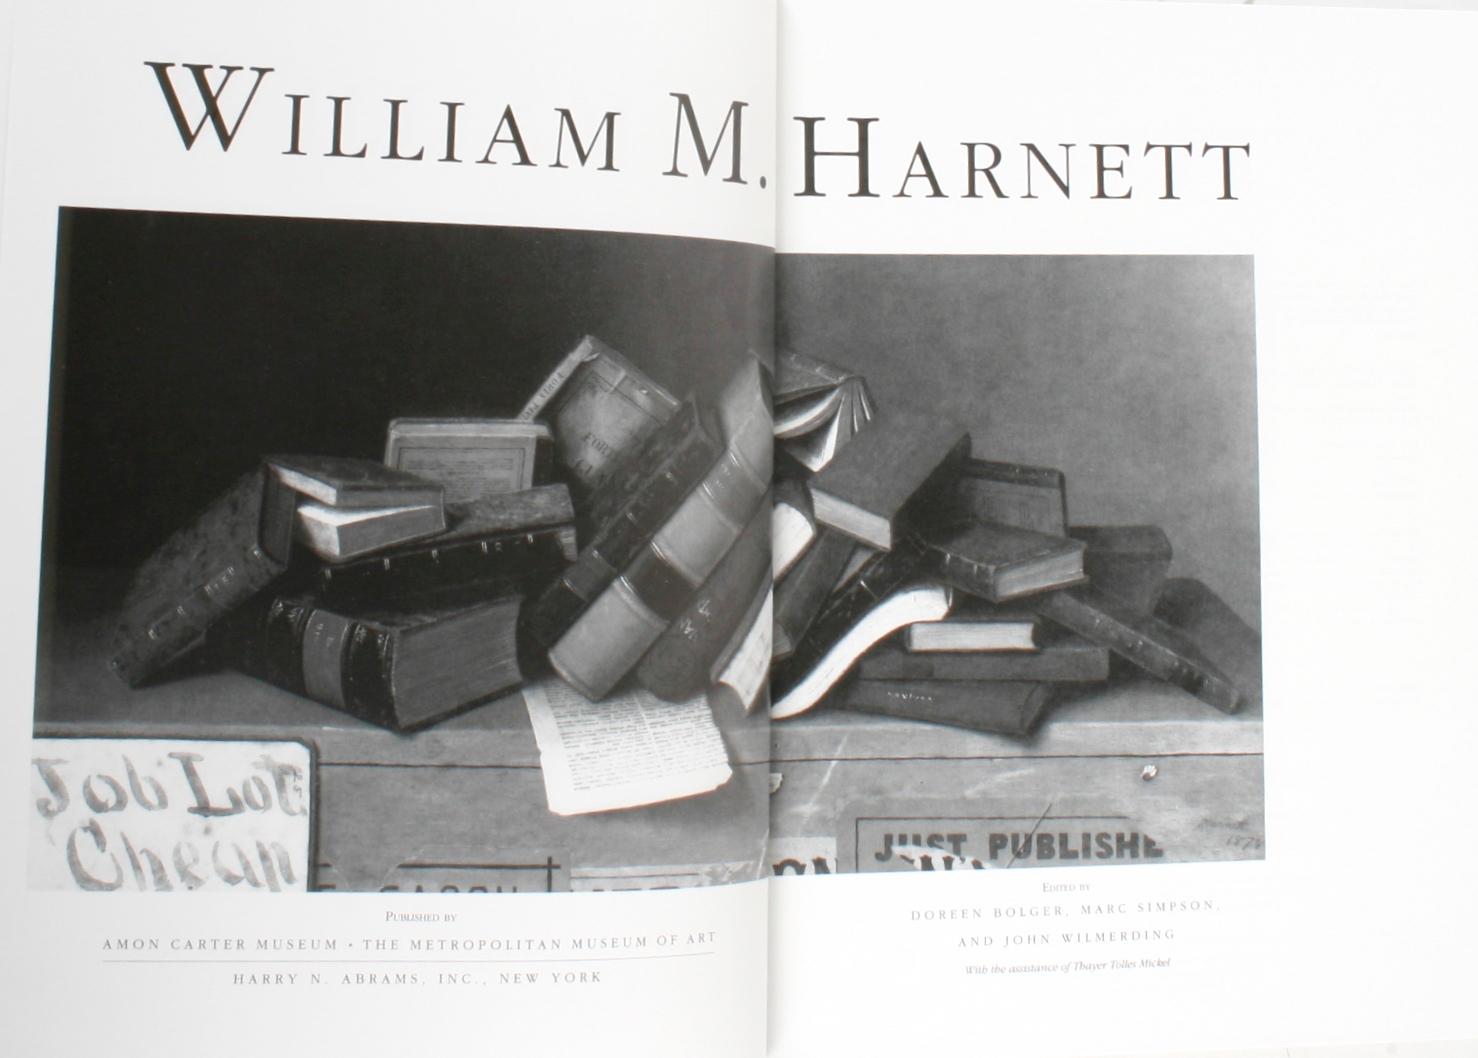 William M. Harnett. New York: Harry N. Abrams, Inc., 1992. First Edition softcover exhibition catalogue. A retrospective published in conjunction with the exhibition which was co-organized by The Metropolitan Museum of Art, Amon Carter Museum in